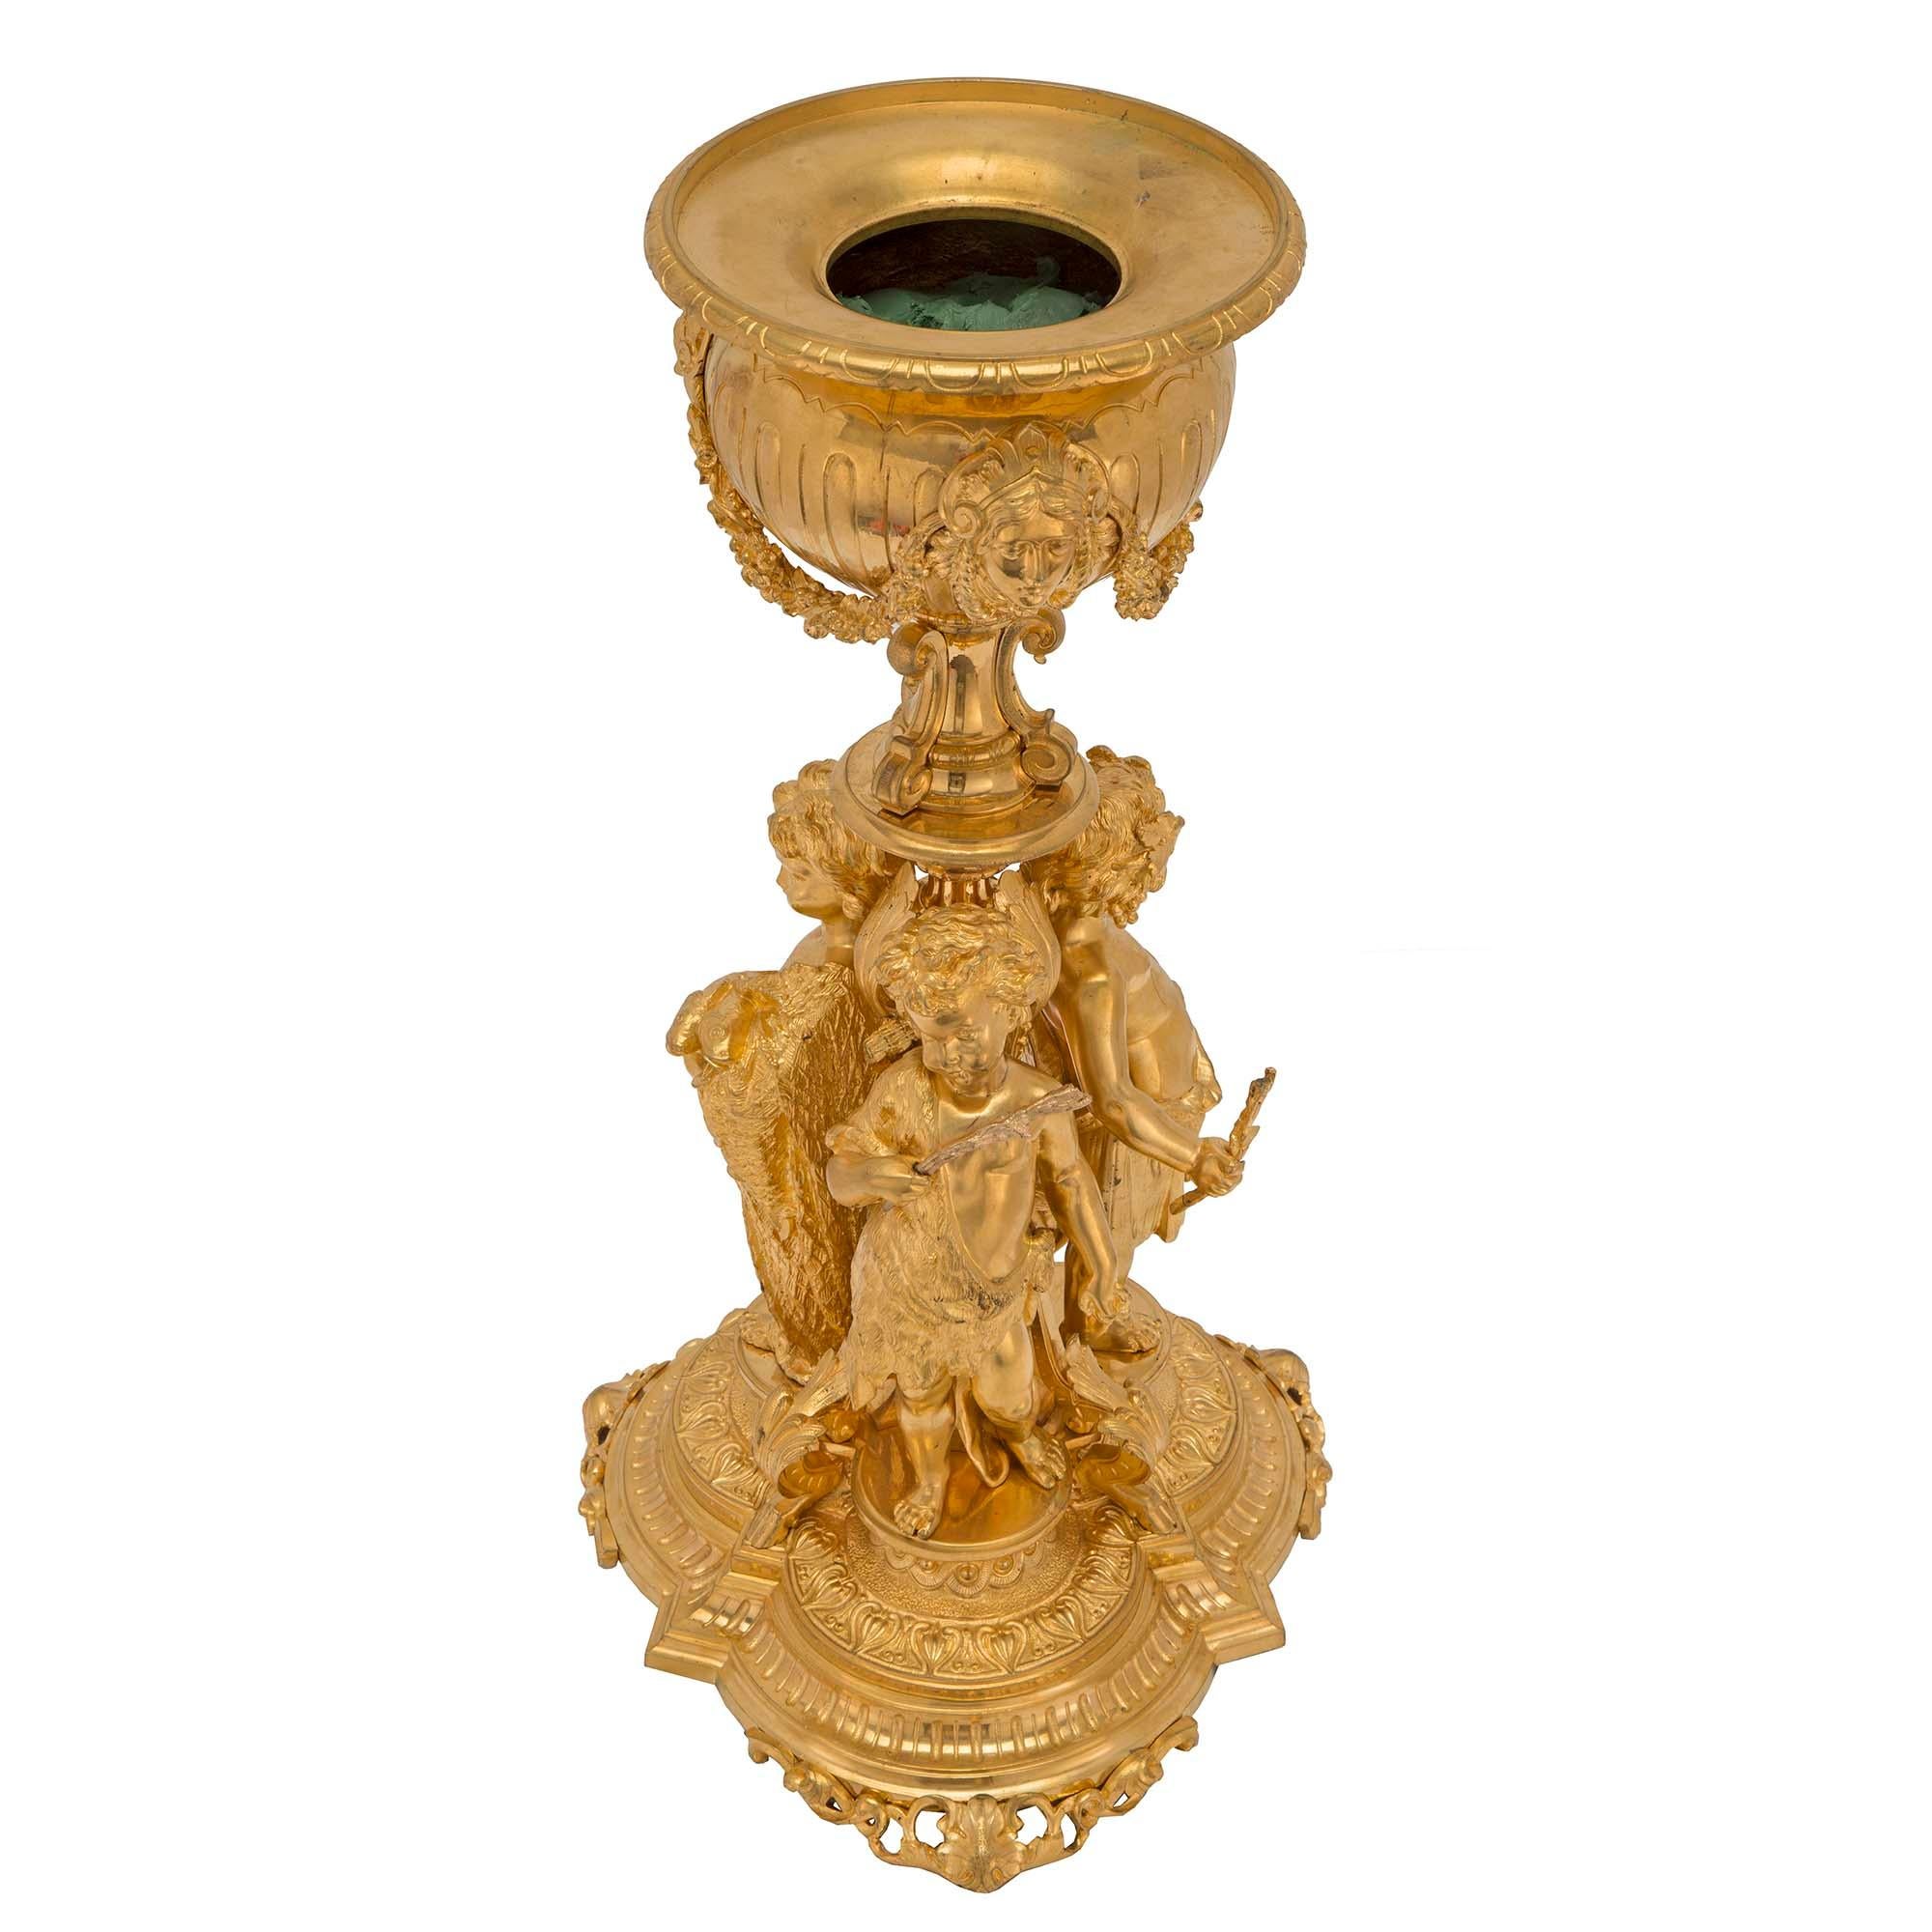 An exquisite French 19th century Louis XVI st. ormolu urn. The urn is raised on a finely chased design scalloped base with pierced feet. At the column are three playful cherubs, one dressed as a hunter with a quiver of arrows on his back, the other